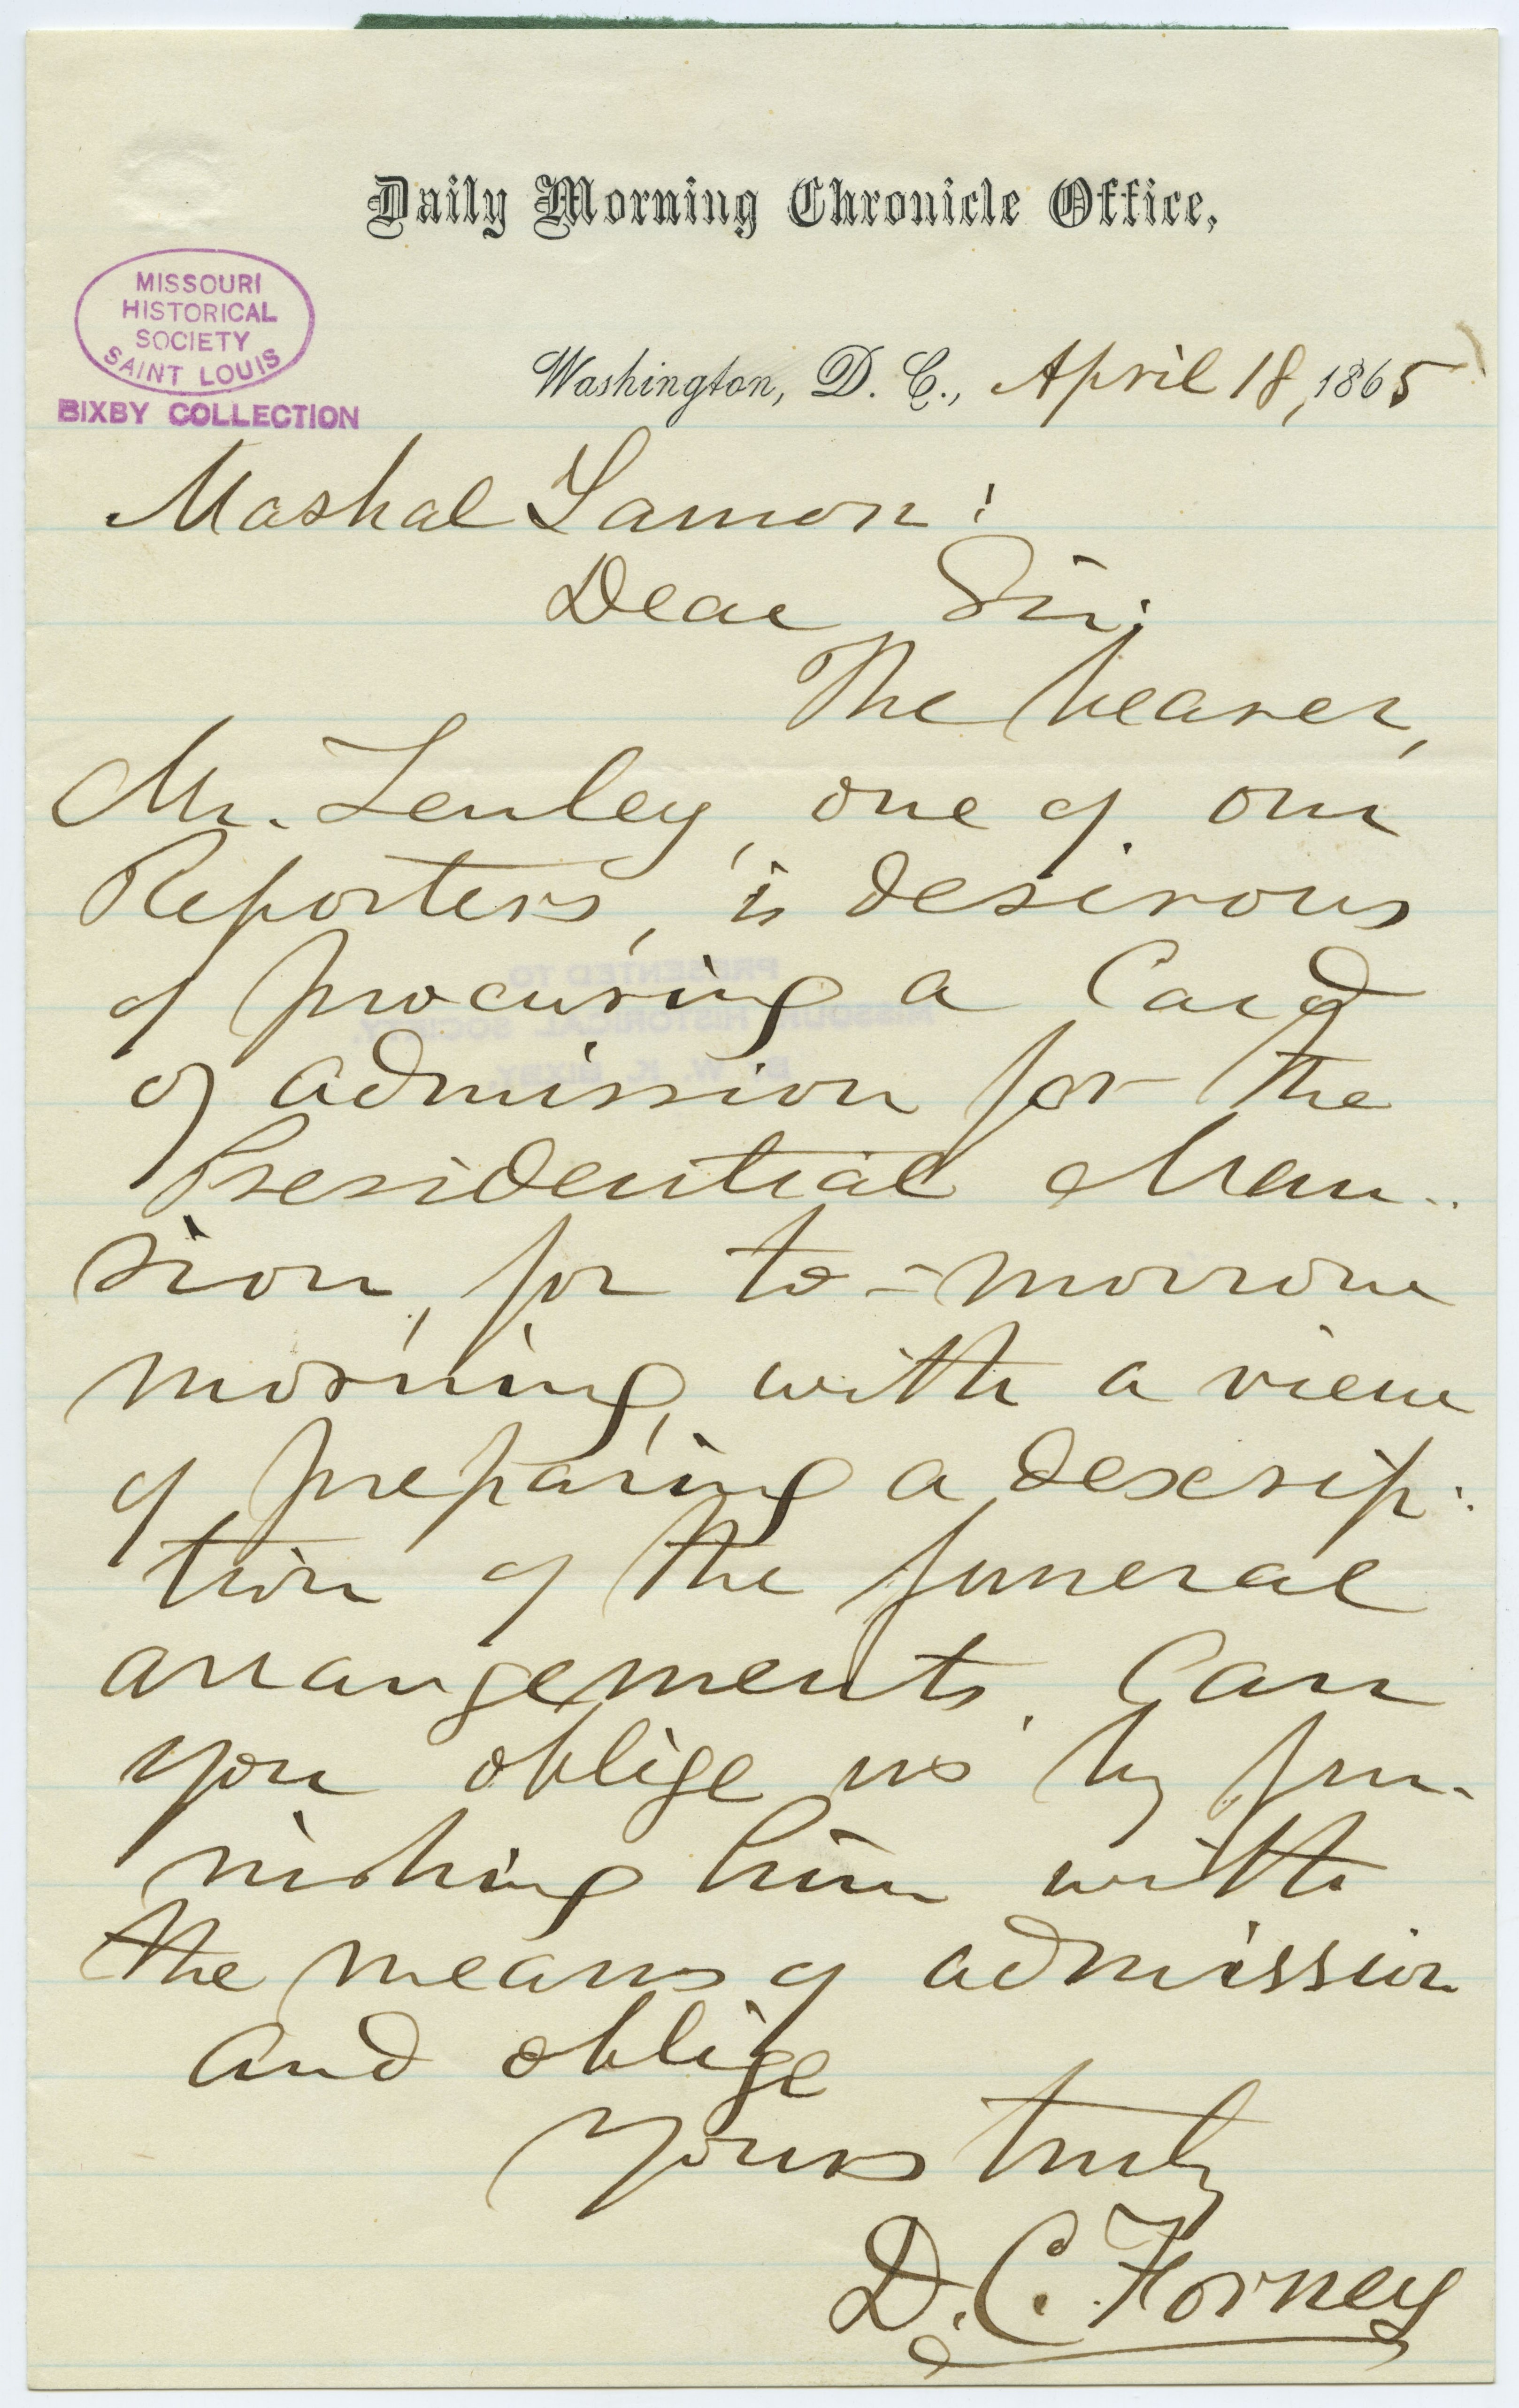 Letter signed D.C. Forney, Daily Morning Chronicle Office, Washington, D.C., to Marshal Lamon, April 18, 1865